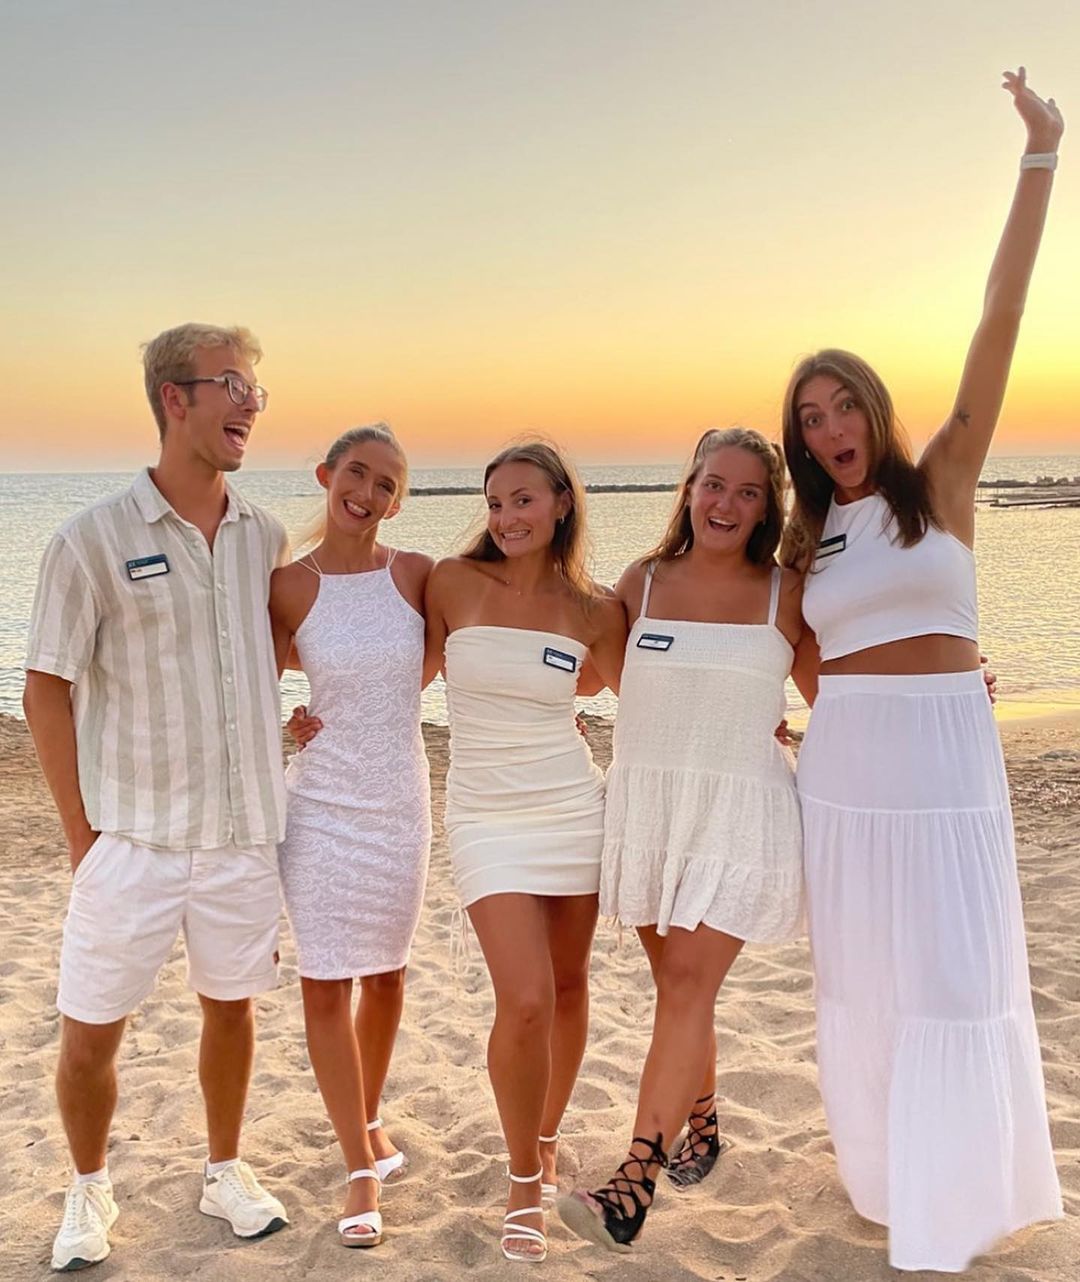 A group of 5 reps are stood on a beach with the sunset behind them. They are smiling with one member of the group having their arm in the air. They are stood on the sand.